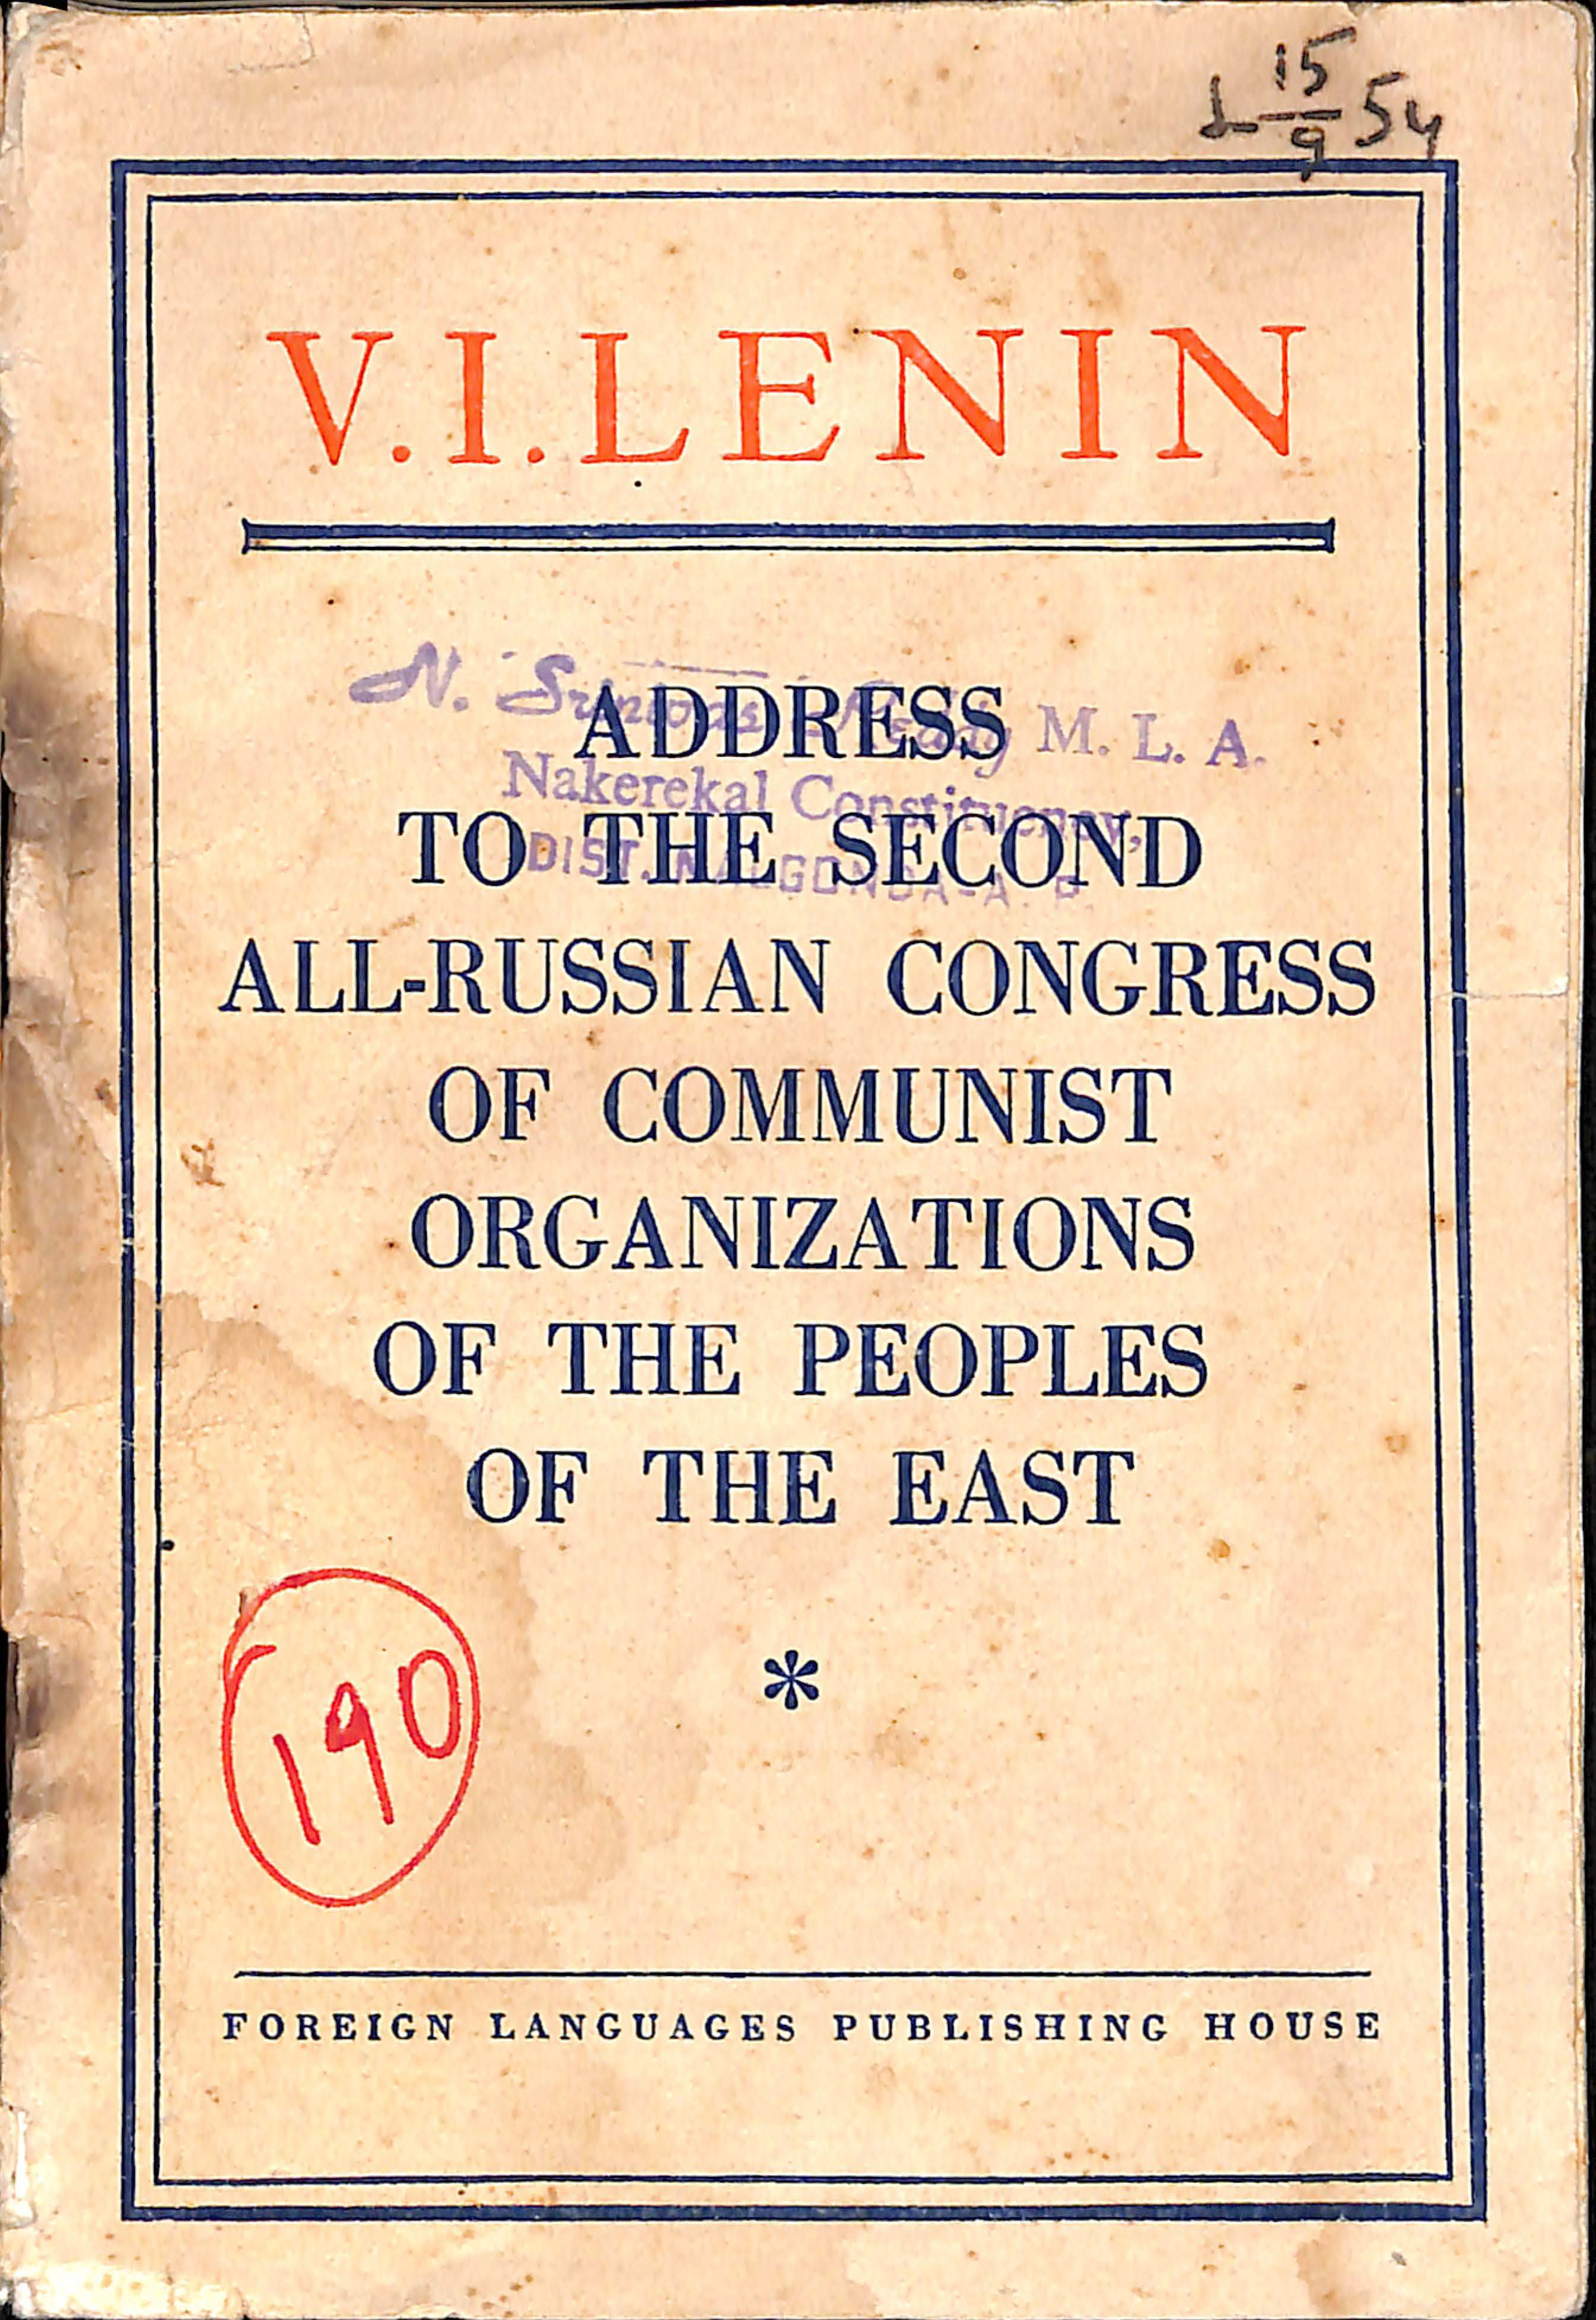 V.L.Lenin address to the second all-russian congress of communist organizations of the peopies of the east